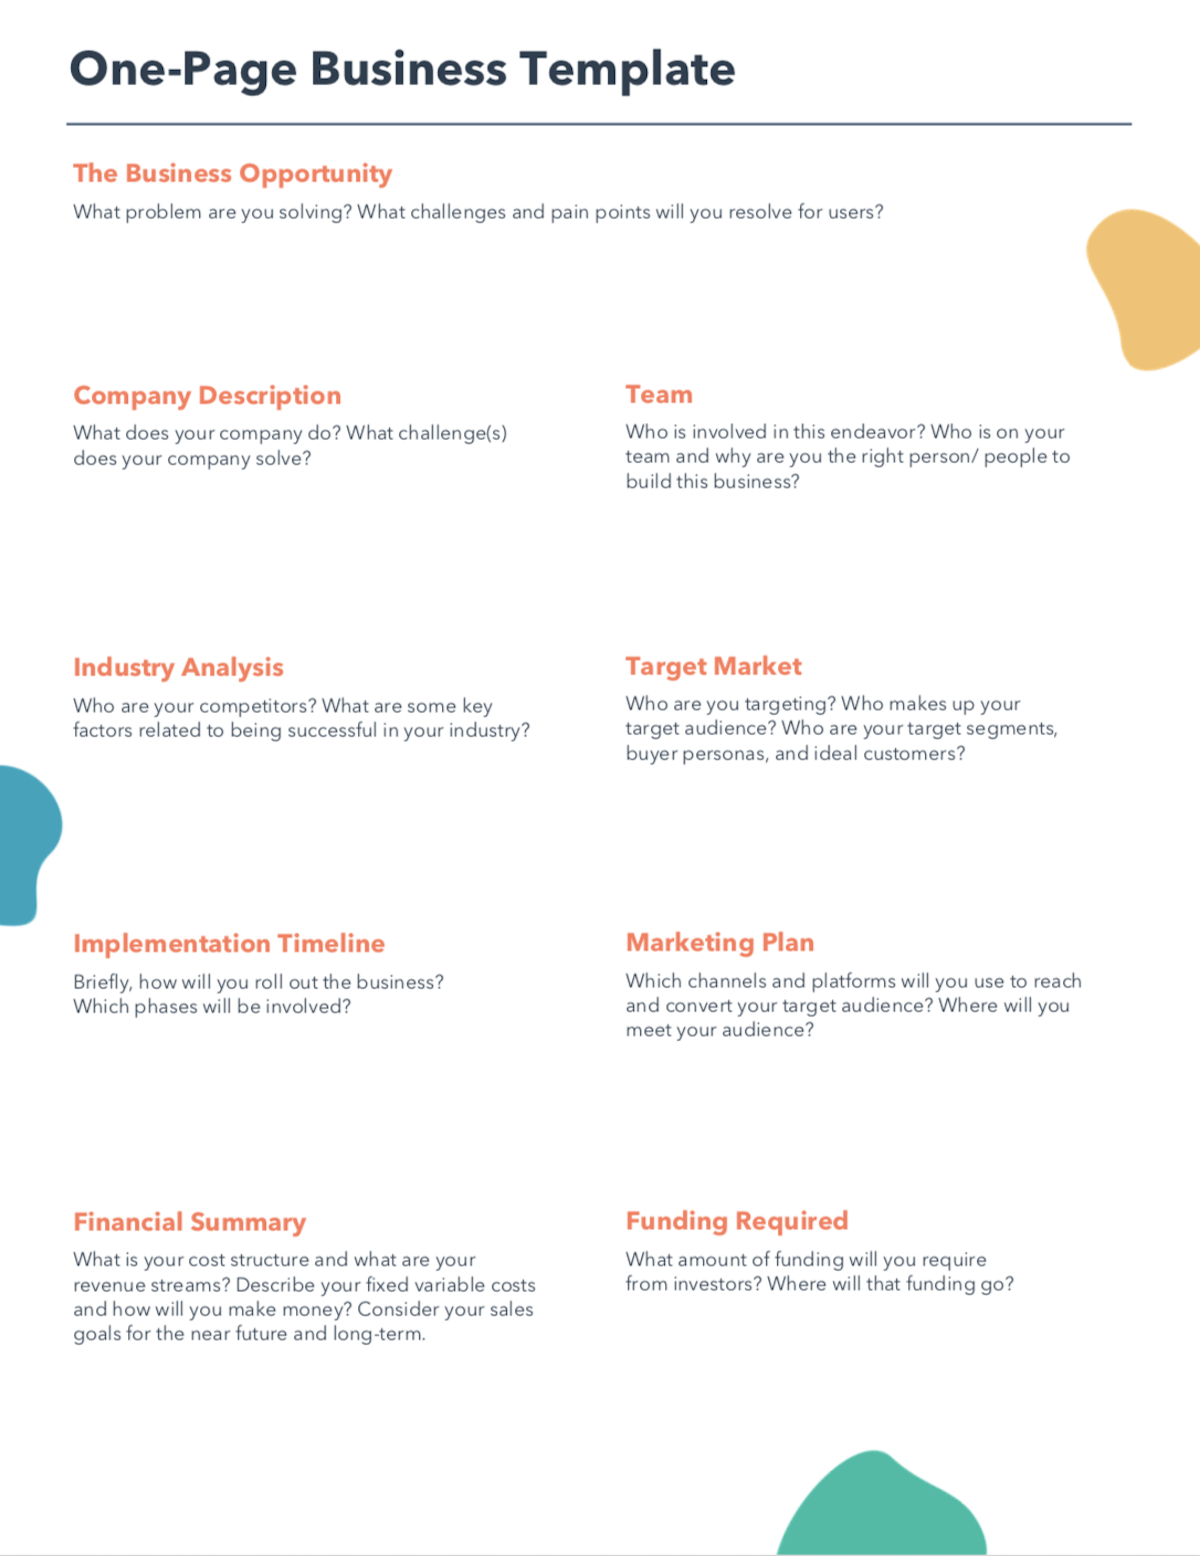 professional business plan template free download